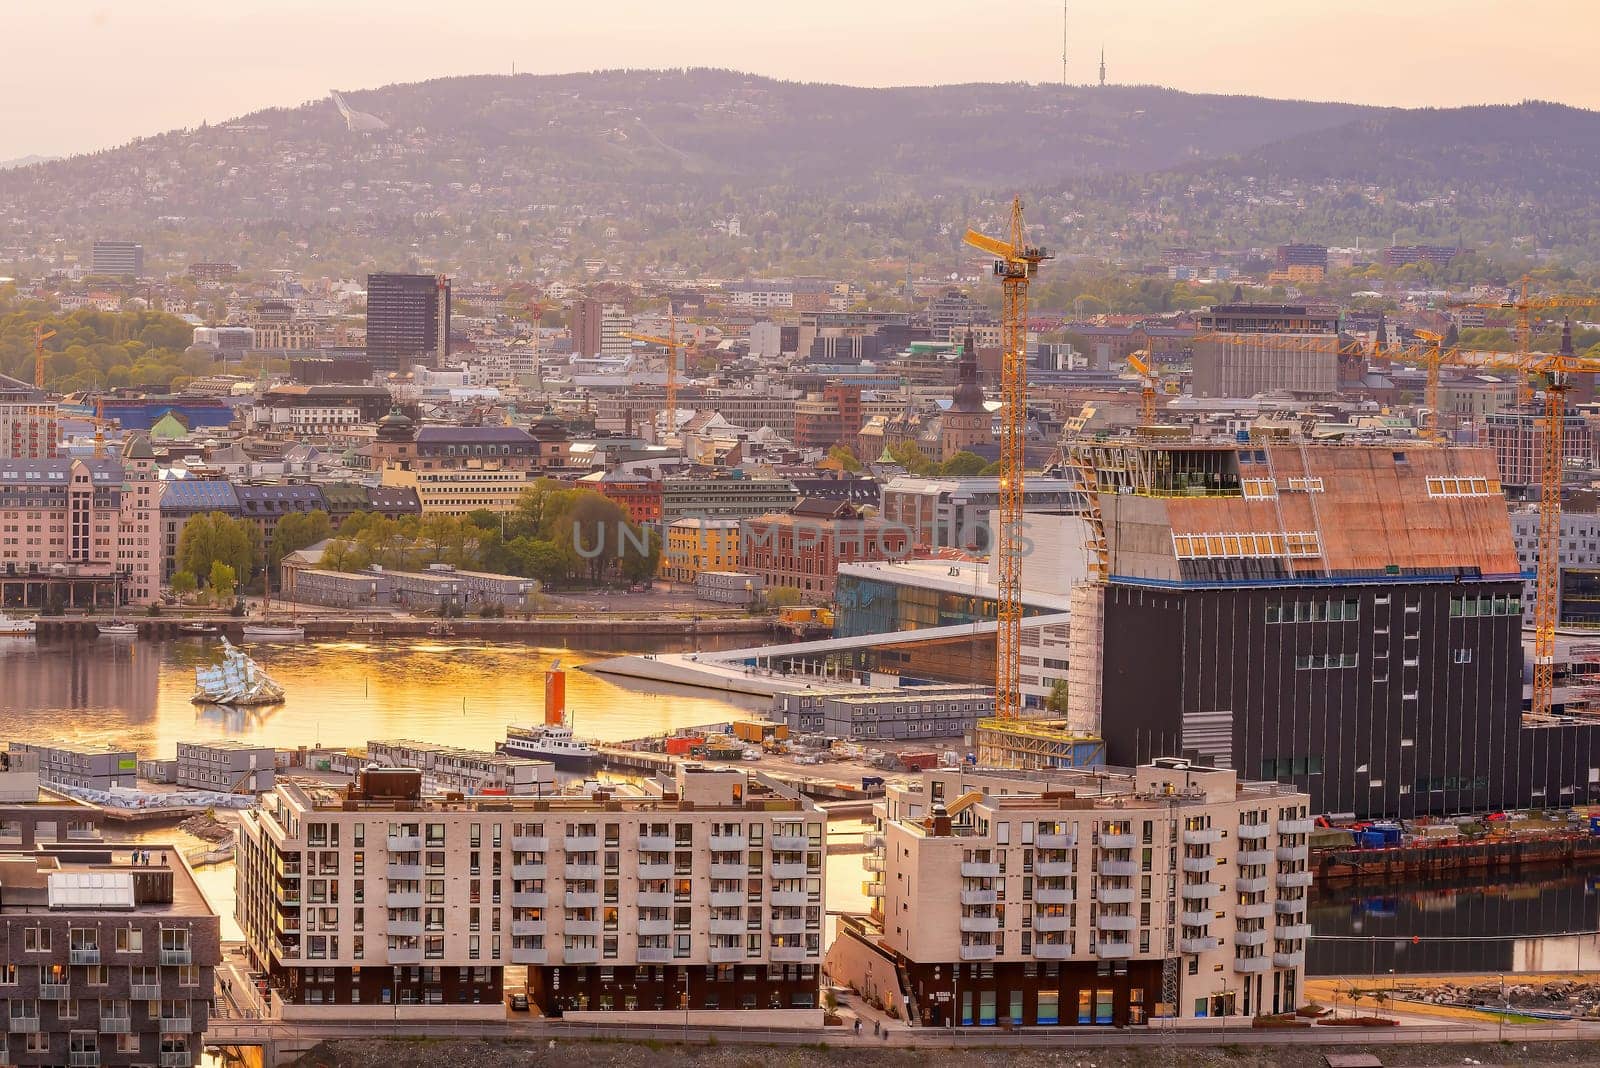  Oslo waterfront downtown city skyline cityscape in Norway at sunset  by f11photo